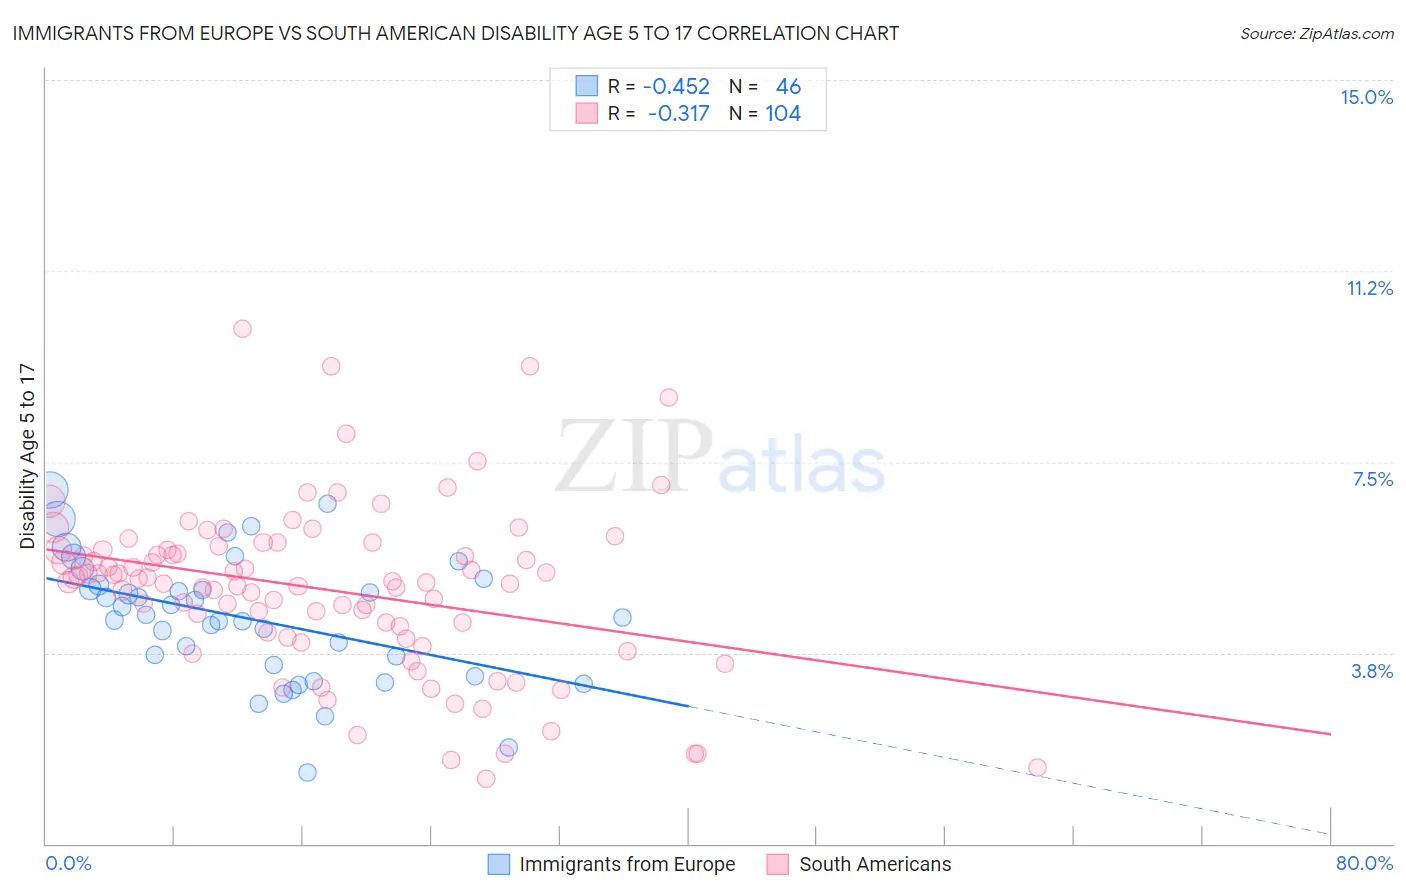 Immigrants from Europe vs South American Disability Age 5 to 17